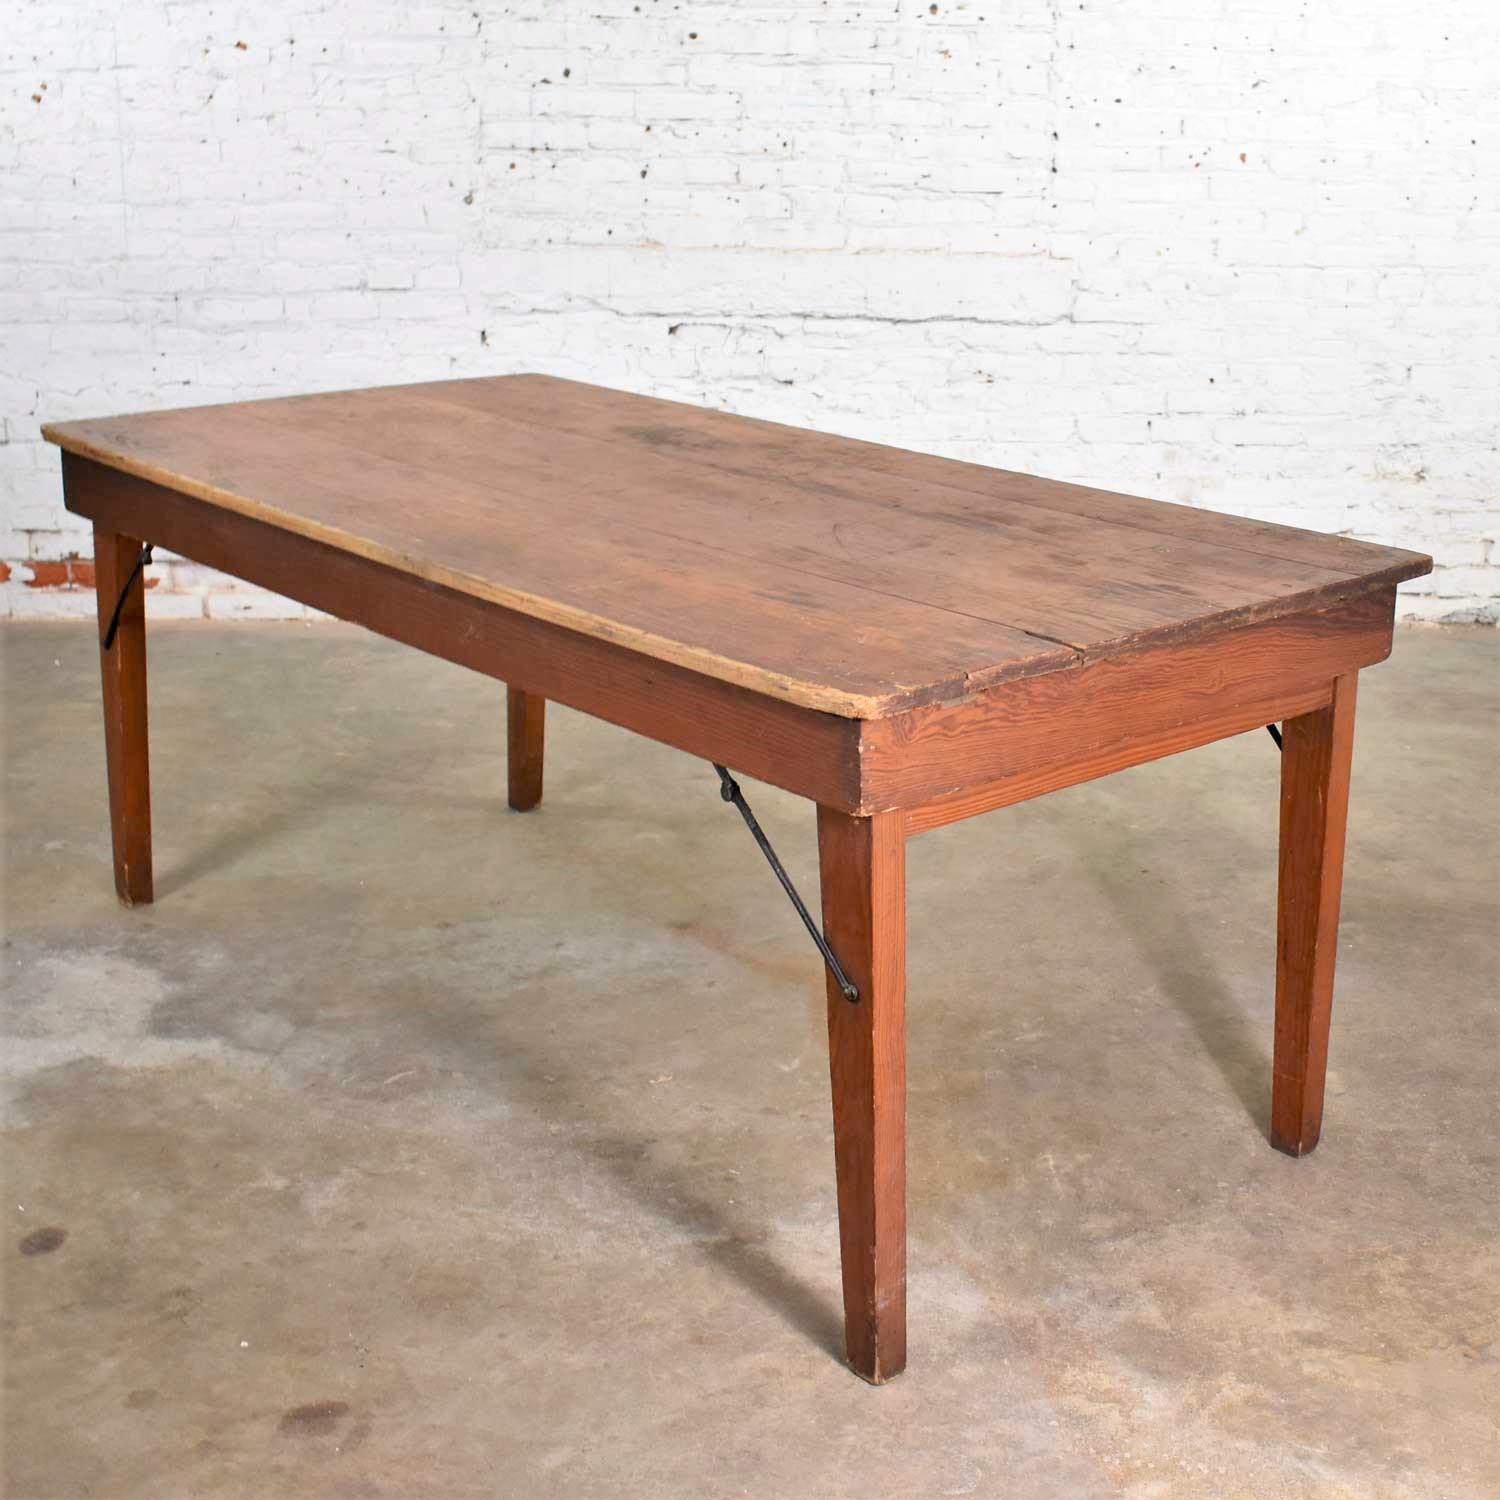 Vintage Pine Industrial Rustic Worktable or Farmhouse Table with Folding Legs